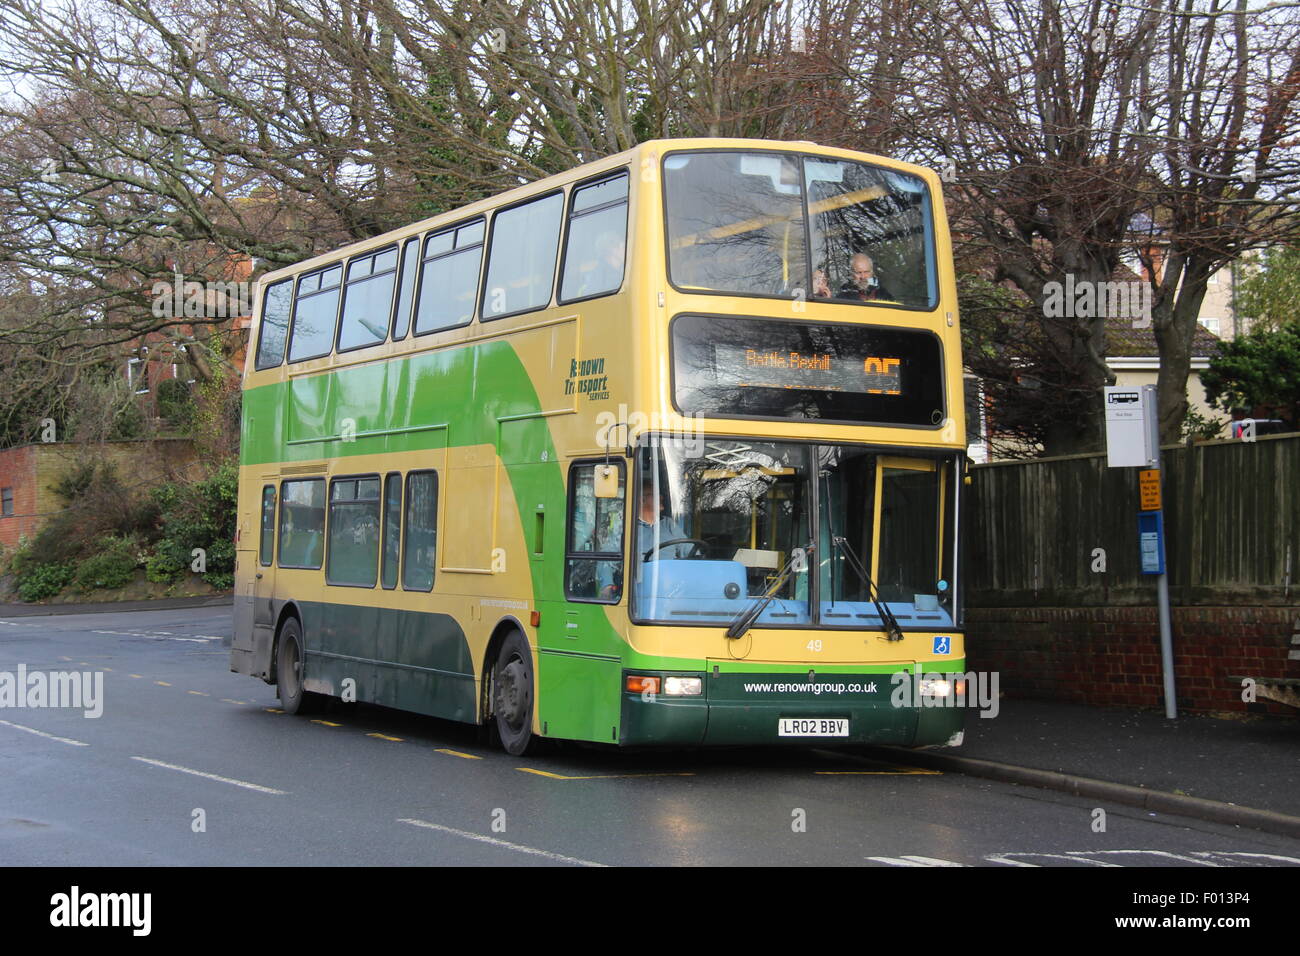 A RENOWN TRANSPORT SERVICES OF BEXHILL-ON-SEA DOUBLE DECK BUS Stock Photo